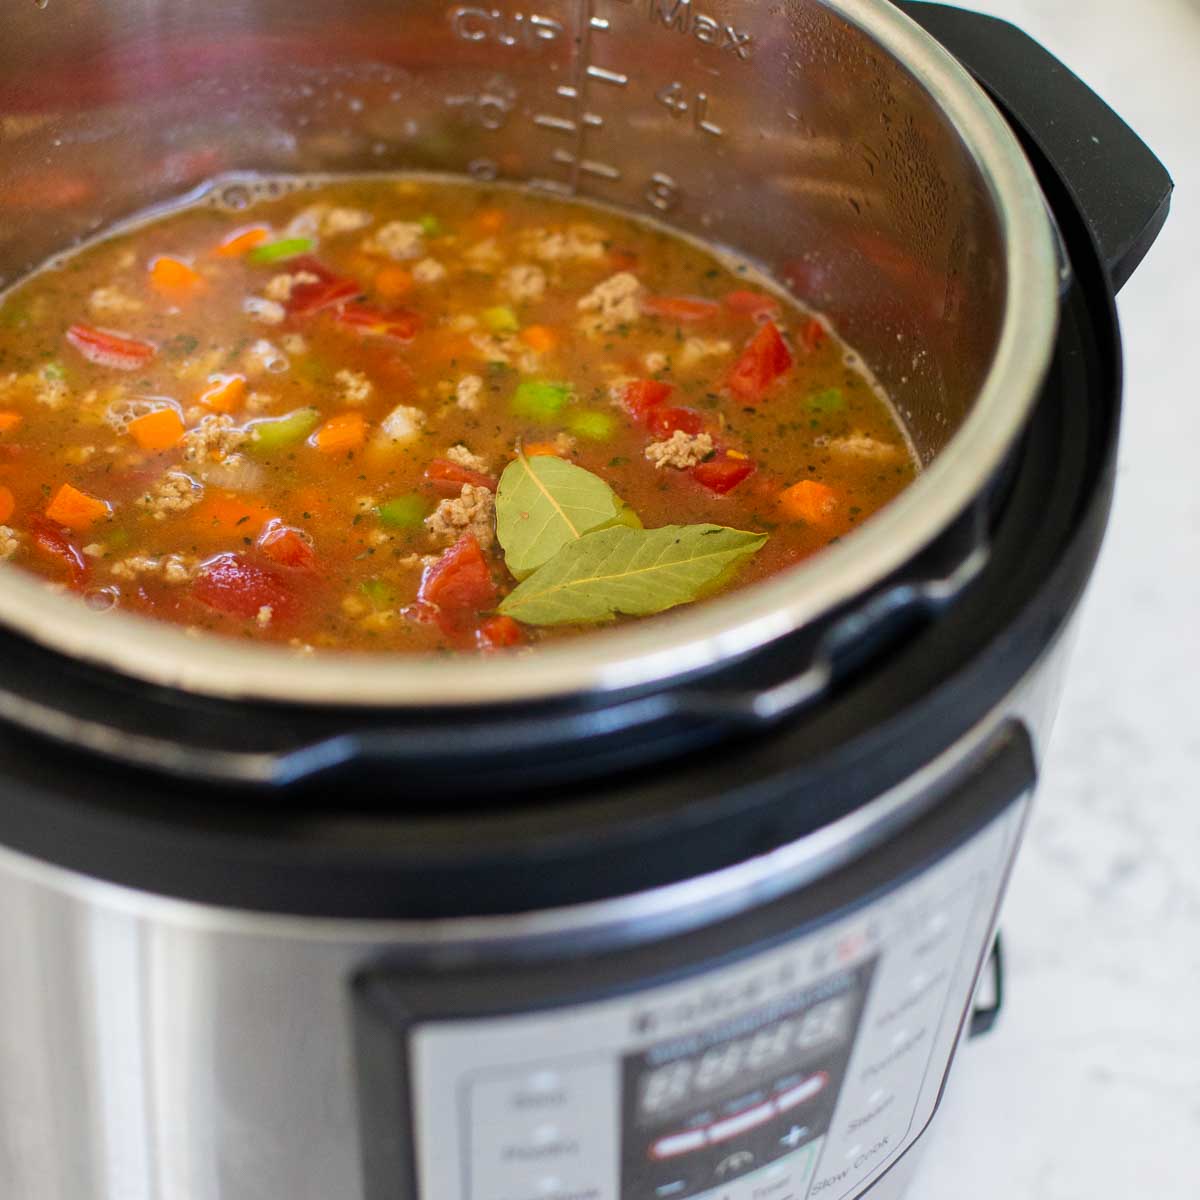 How To Make Turkey Noodle Soup In An Electric Pressure Cooker